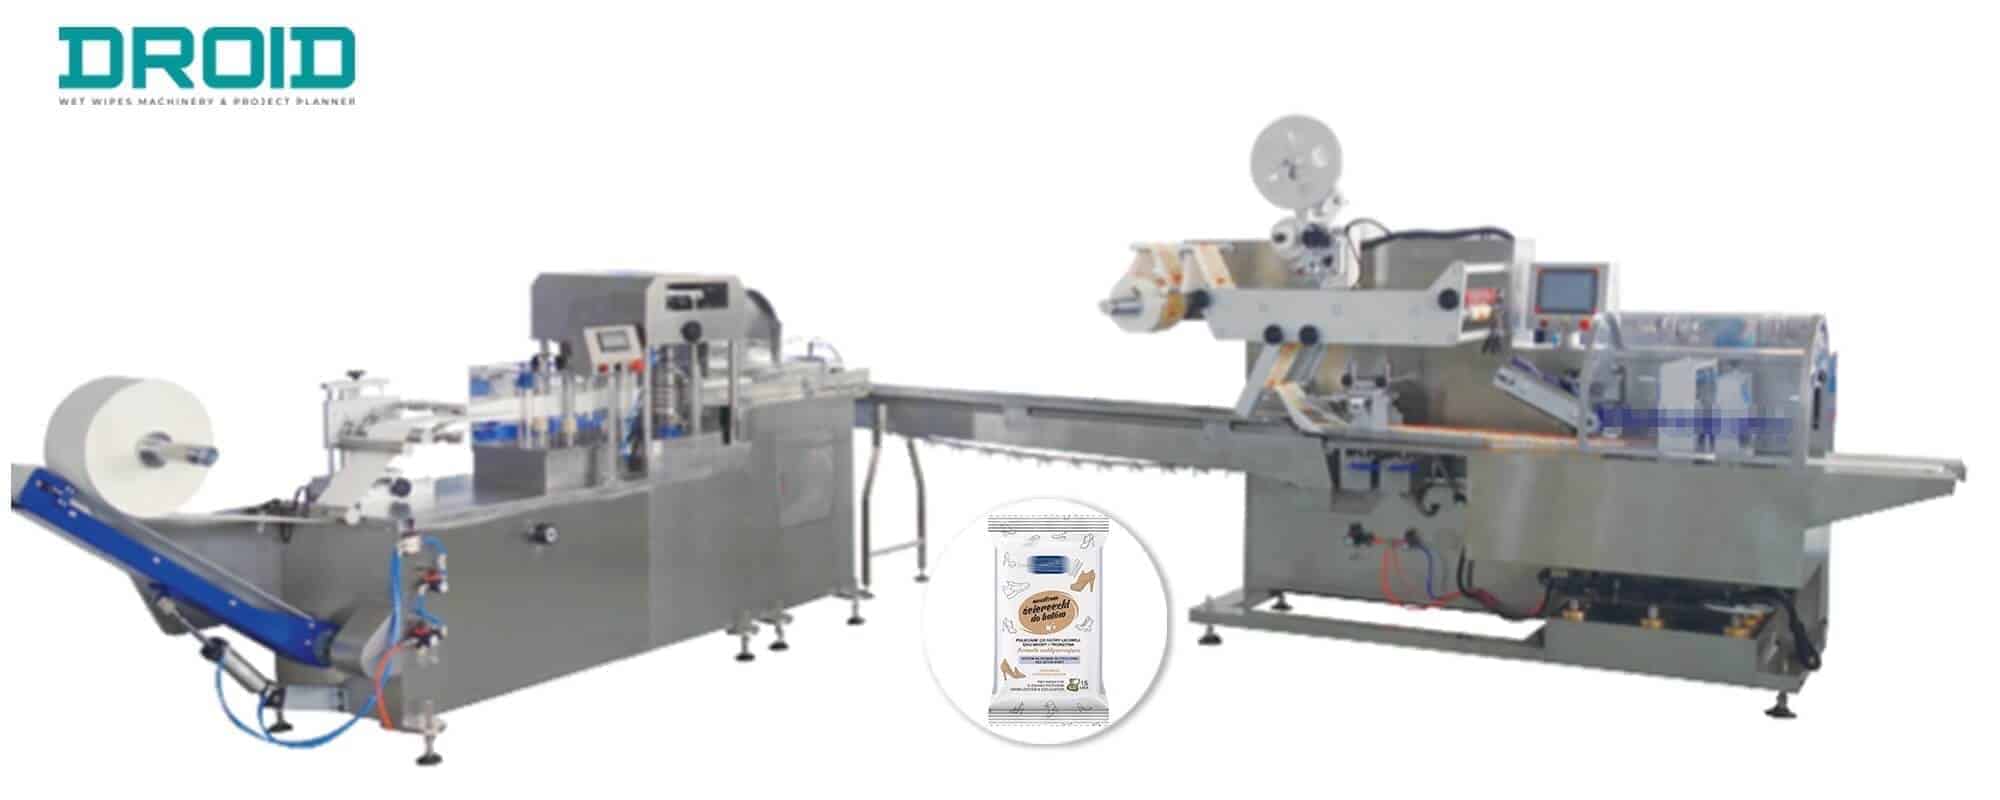 wet wipes machine 1 - DH-MP80 Multipack Wet Wipes Bagging Machine